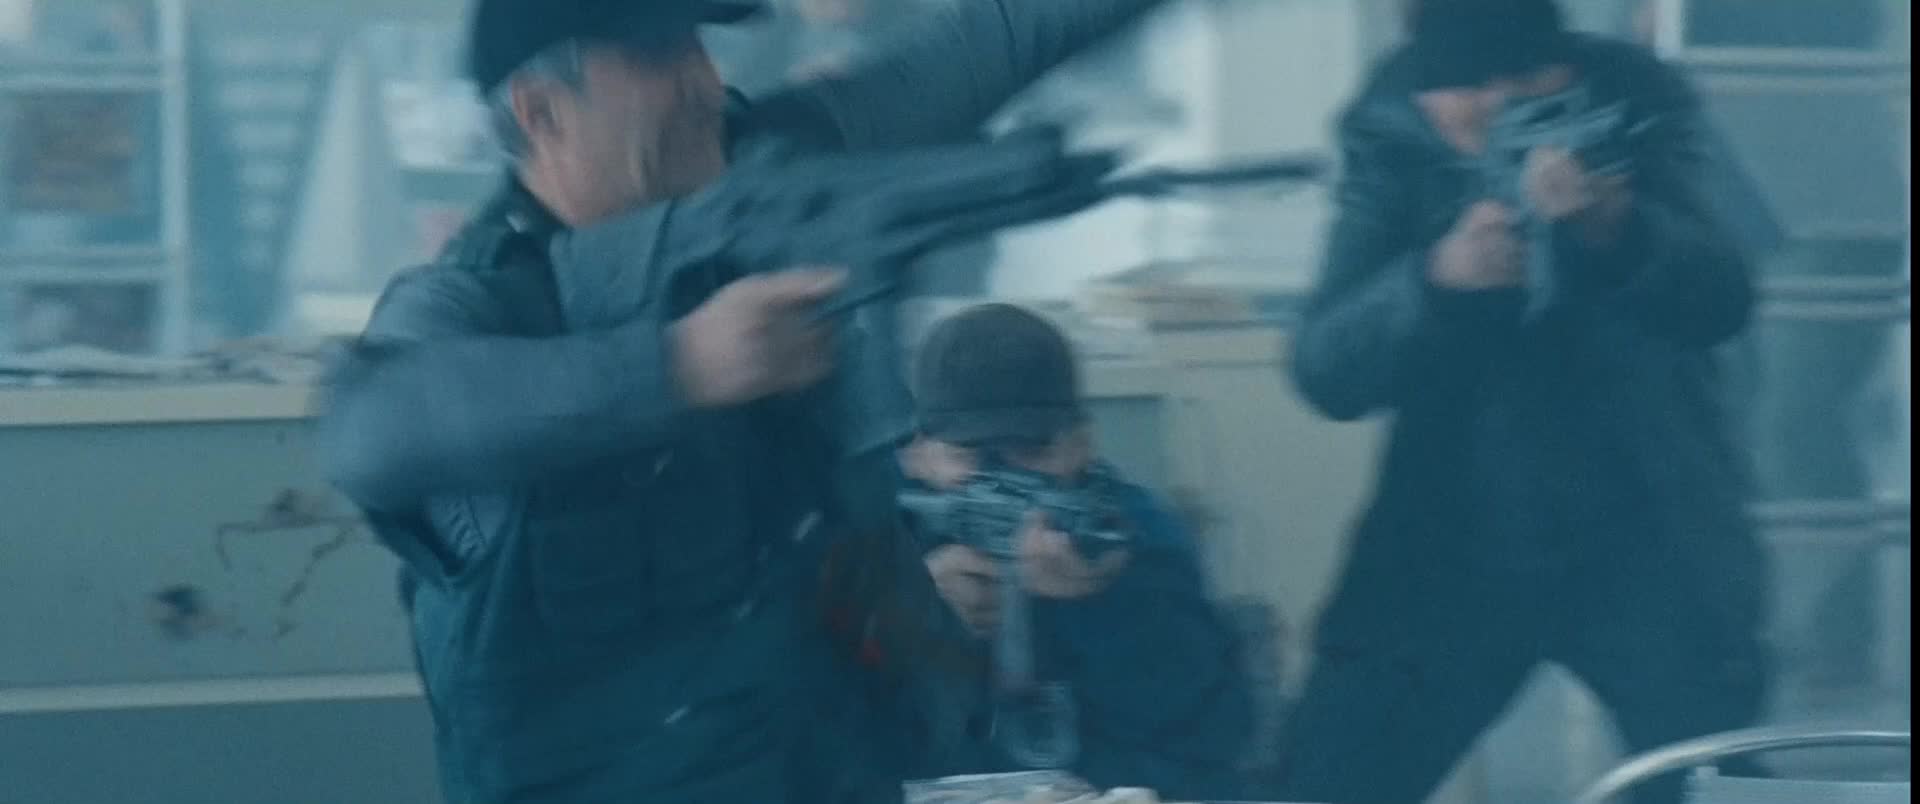 Loading Screenshot for The Expendables 2 (2012)